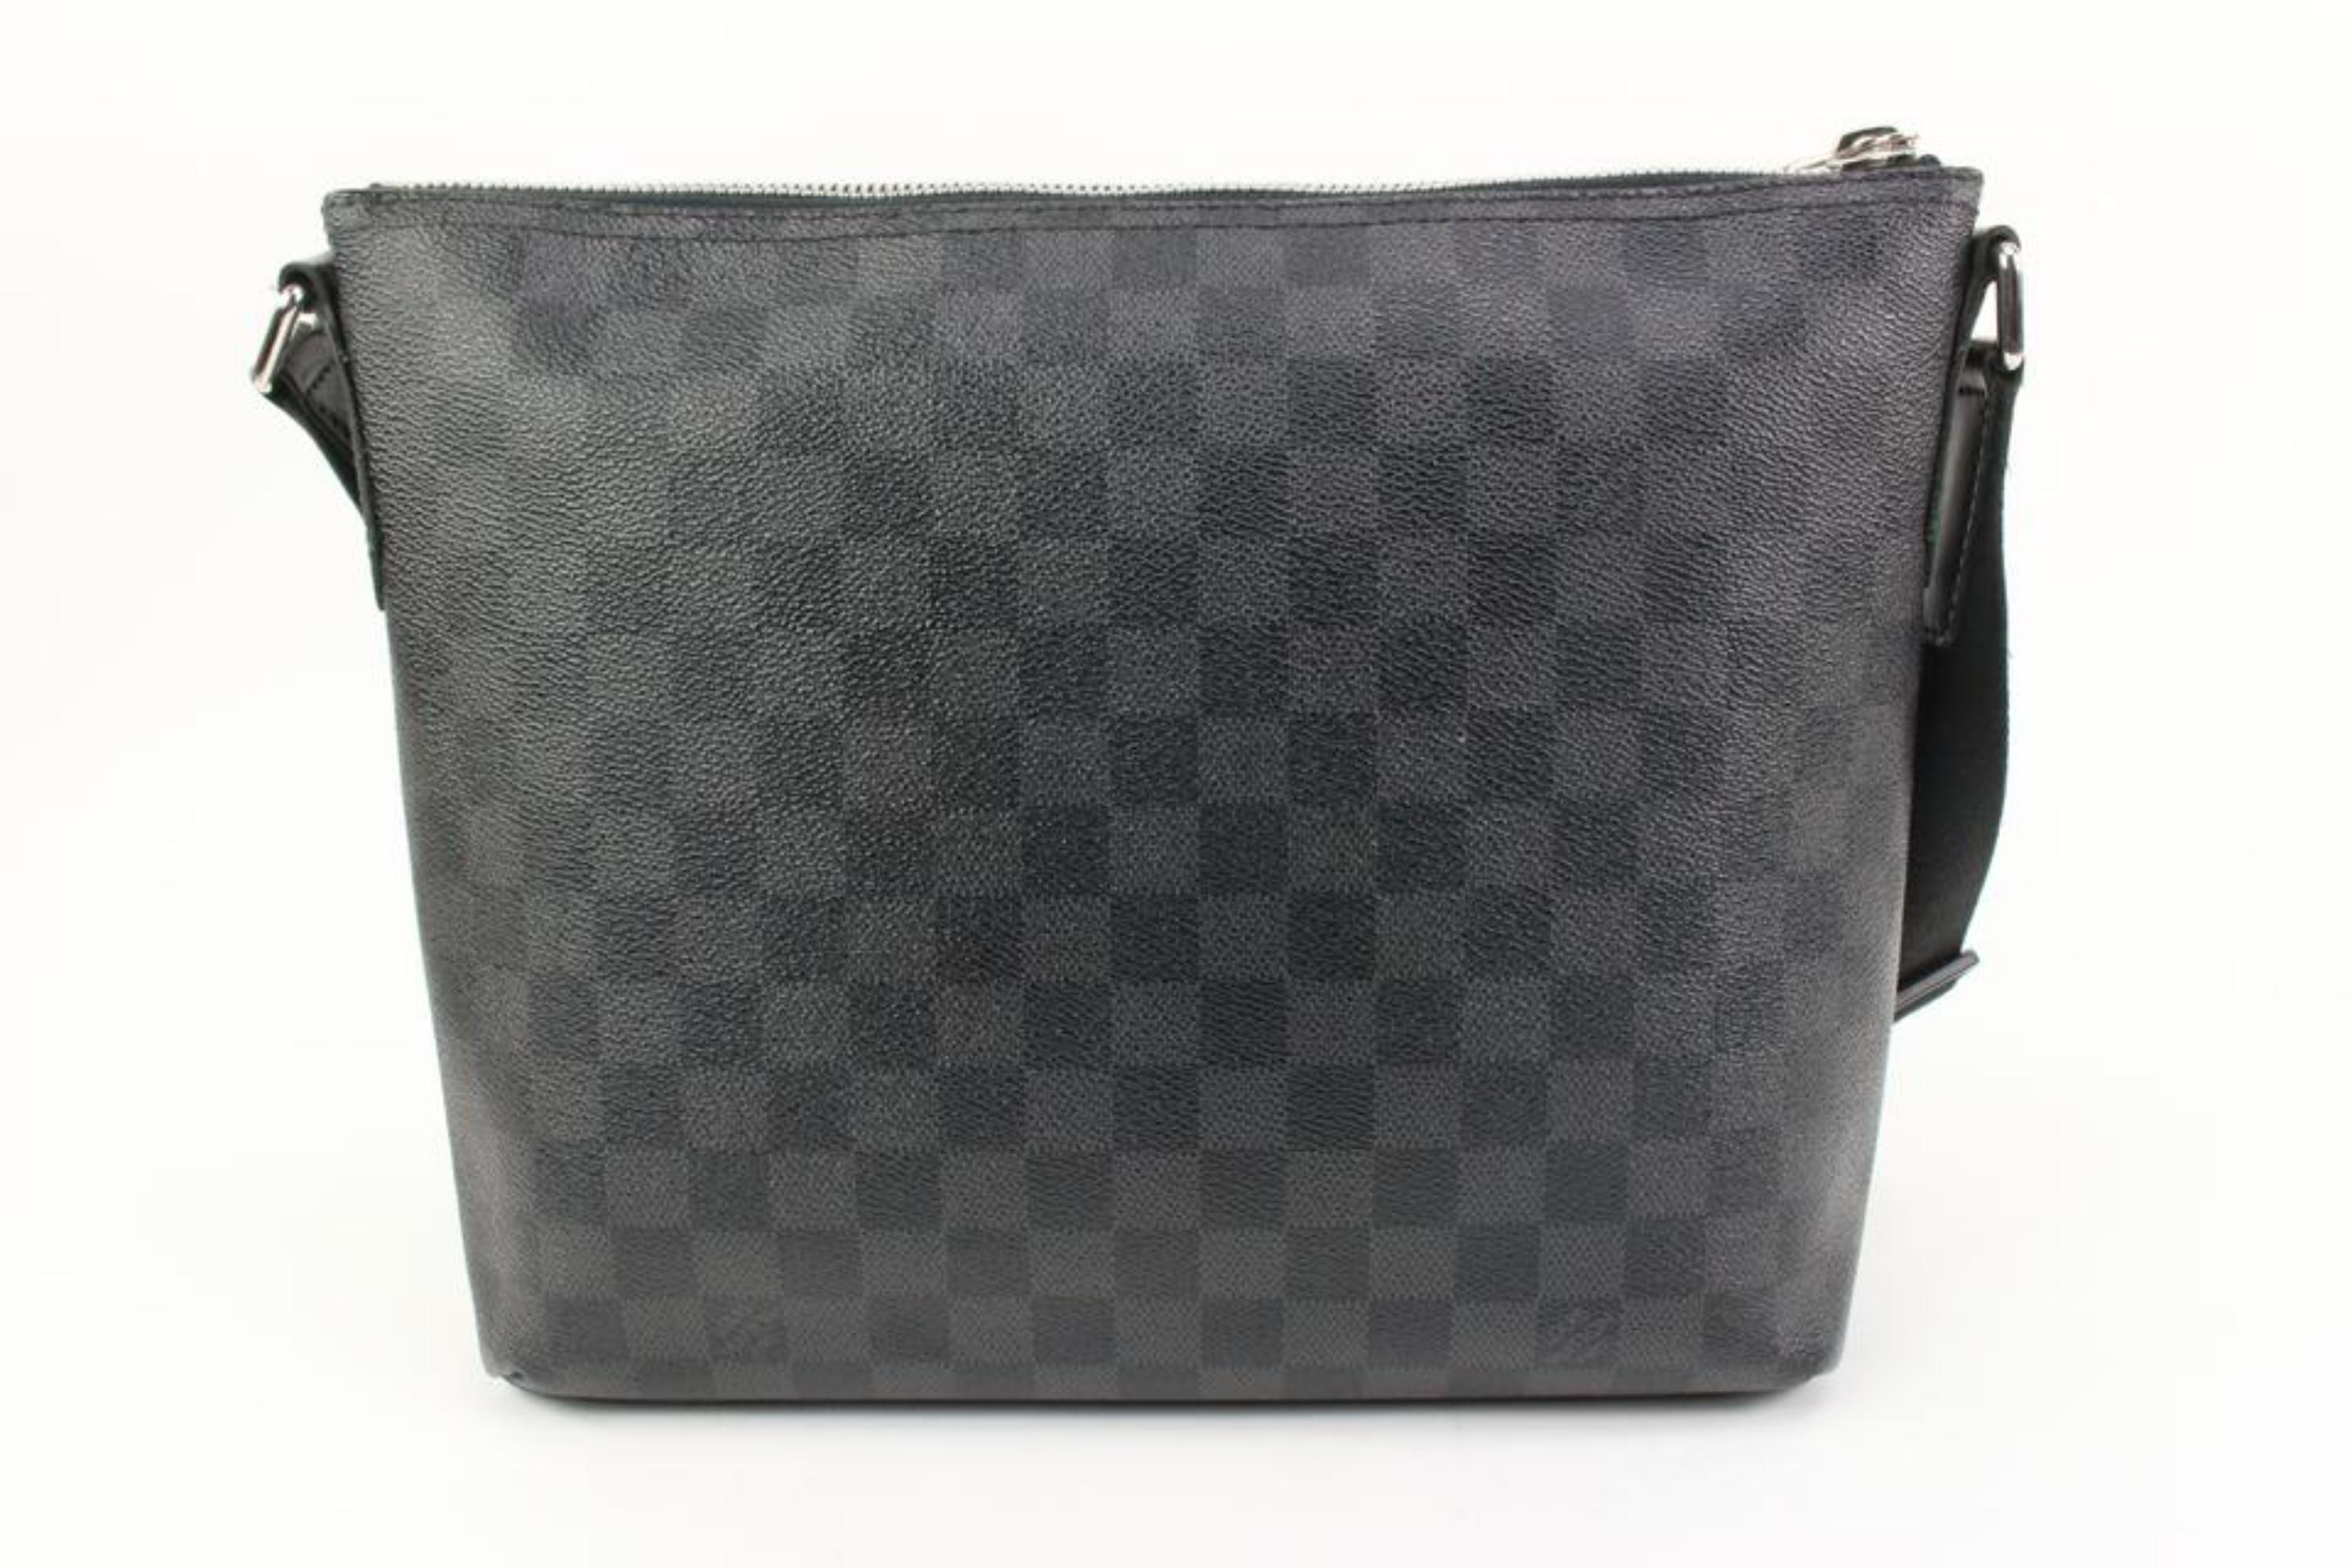 Louis Vuitton Damier Graphite Mick PM Messenger Crossbody 30lk311s In Good Condition For Sale In Dix hills, NY